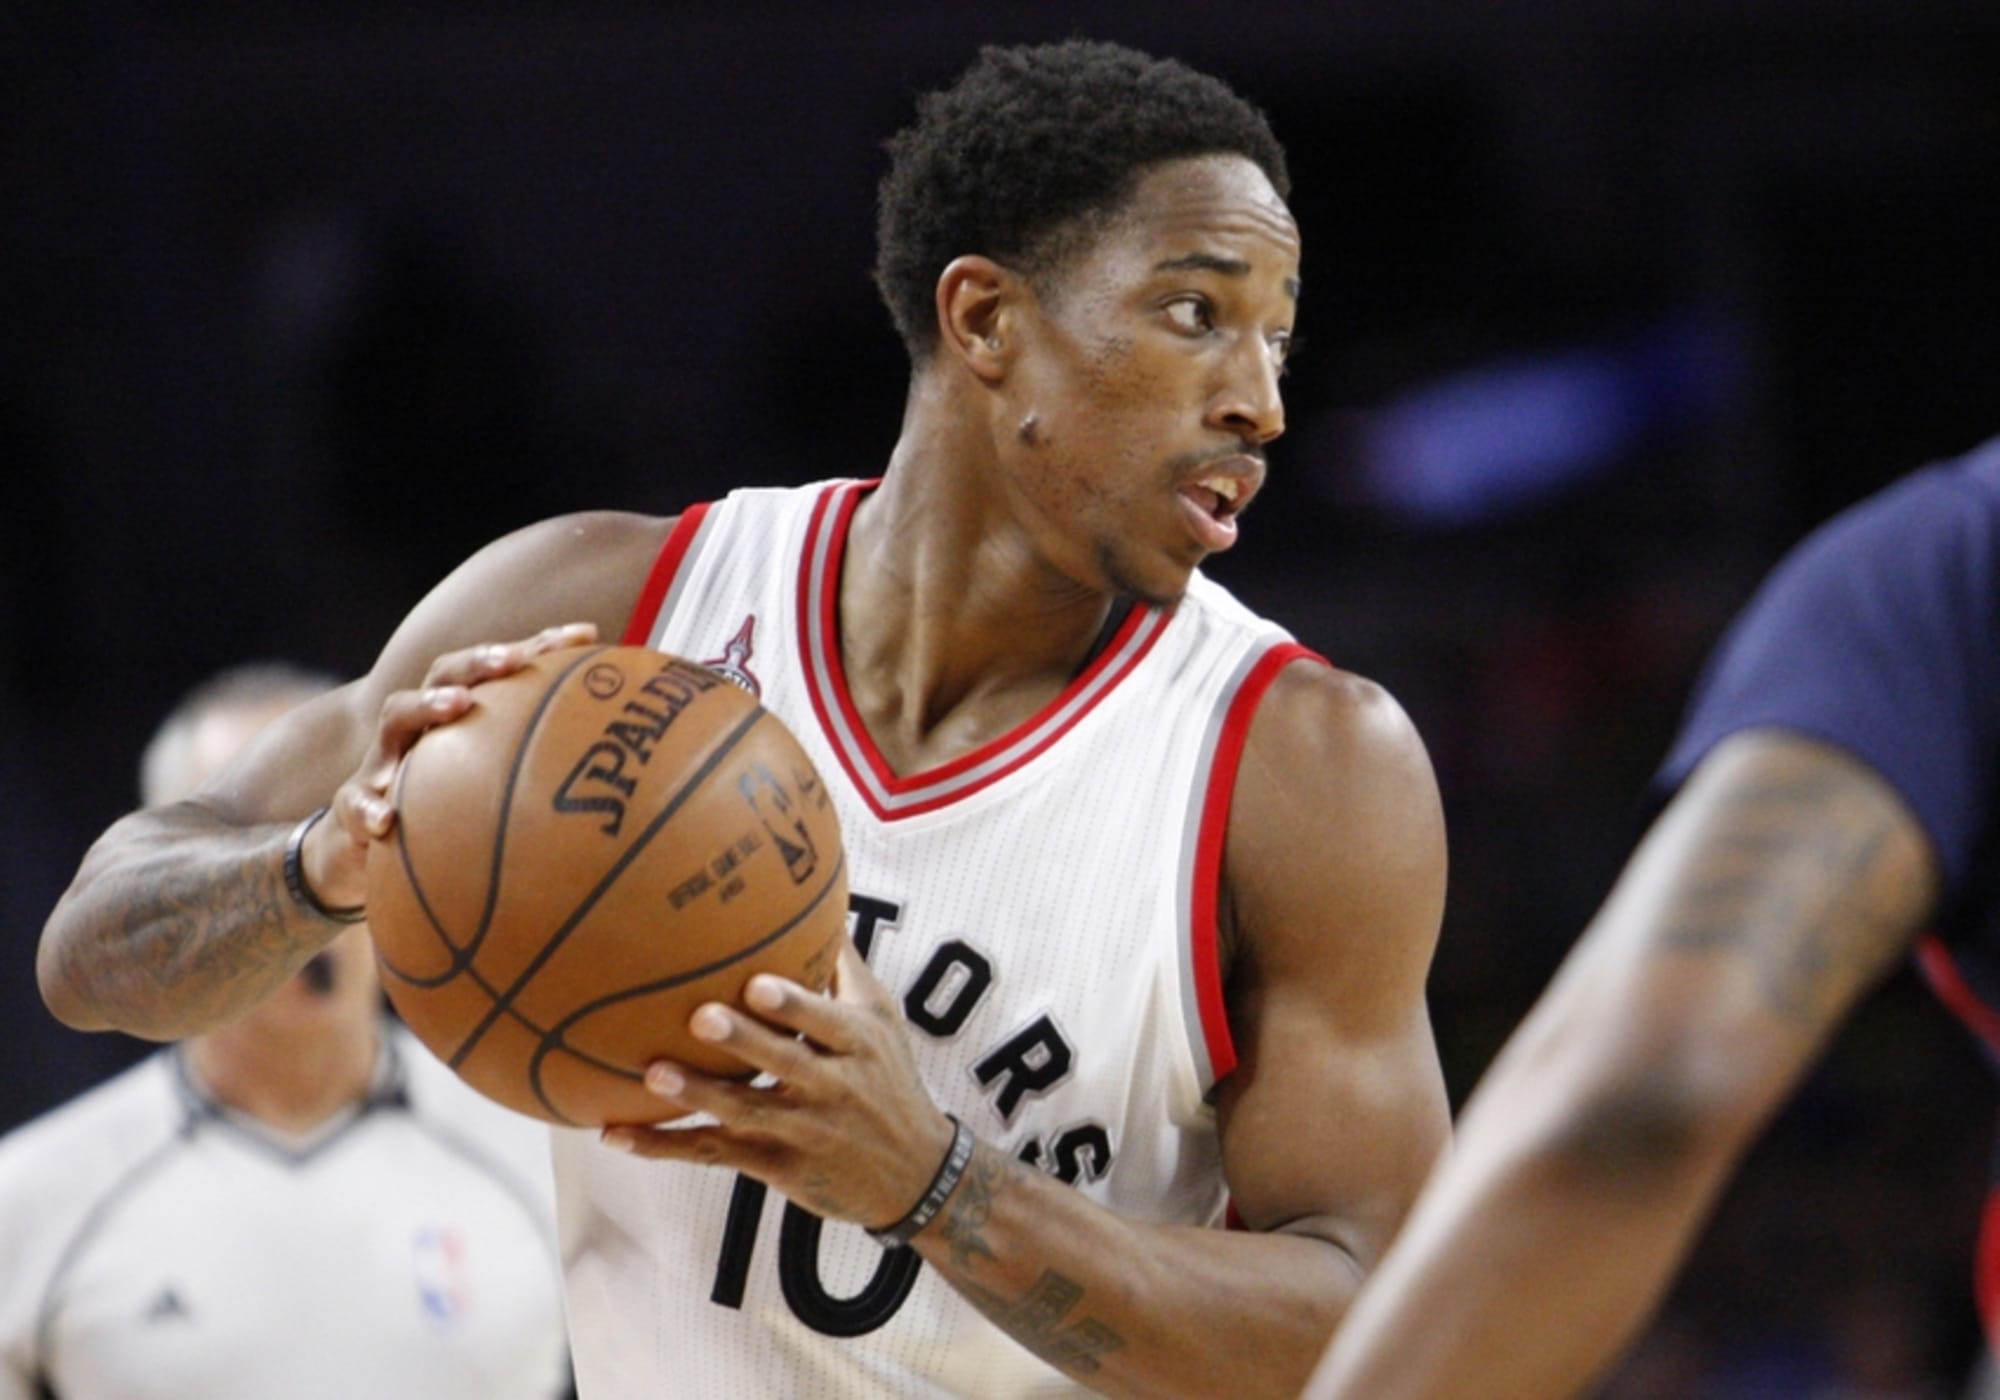 DeRozan scores another 30-point game in Raptors' 118-107 win over